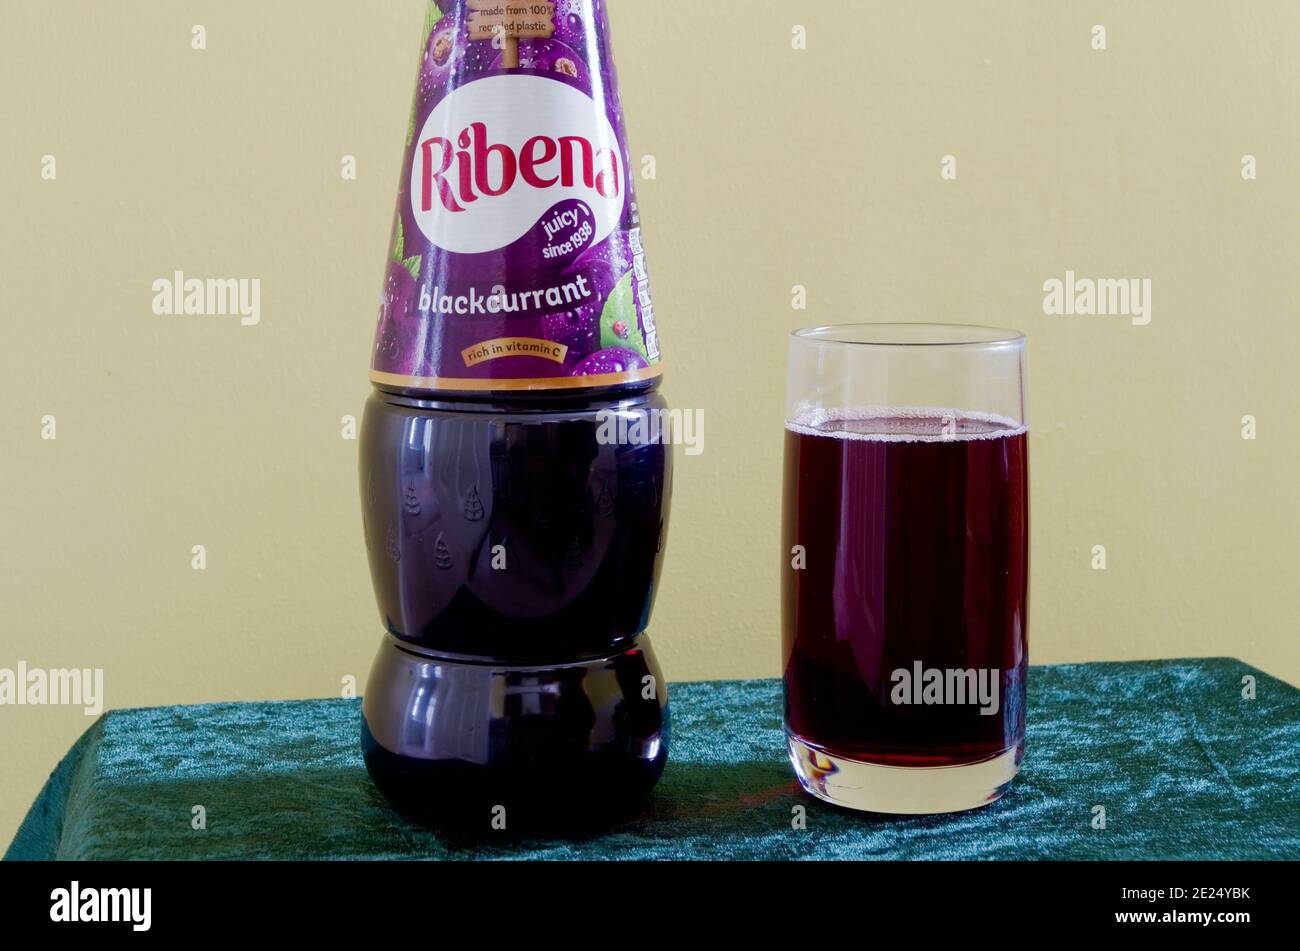 Bottle & Glass of Ribena Blackcurrant Concentrated Cordial Squash Drink, UK Stock Photo